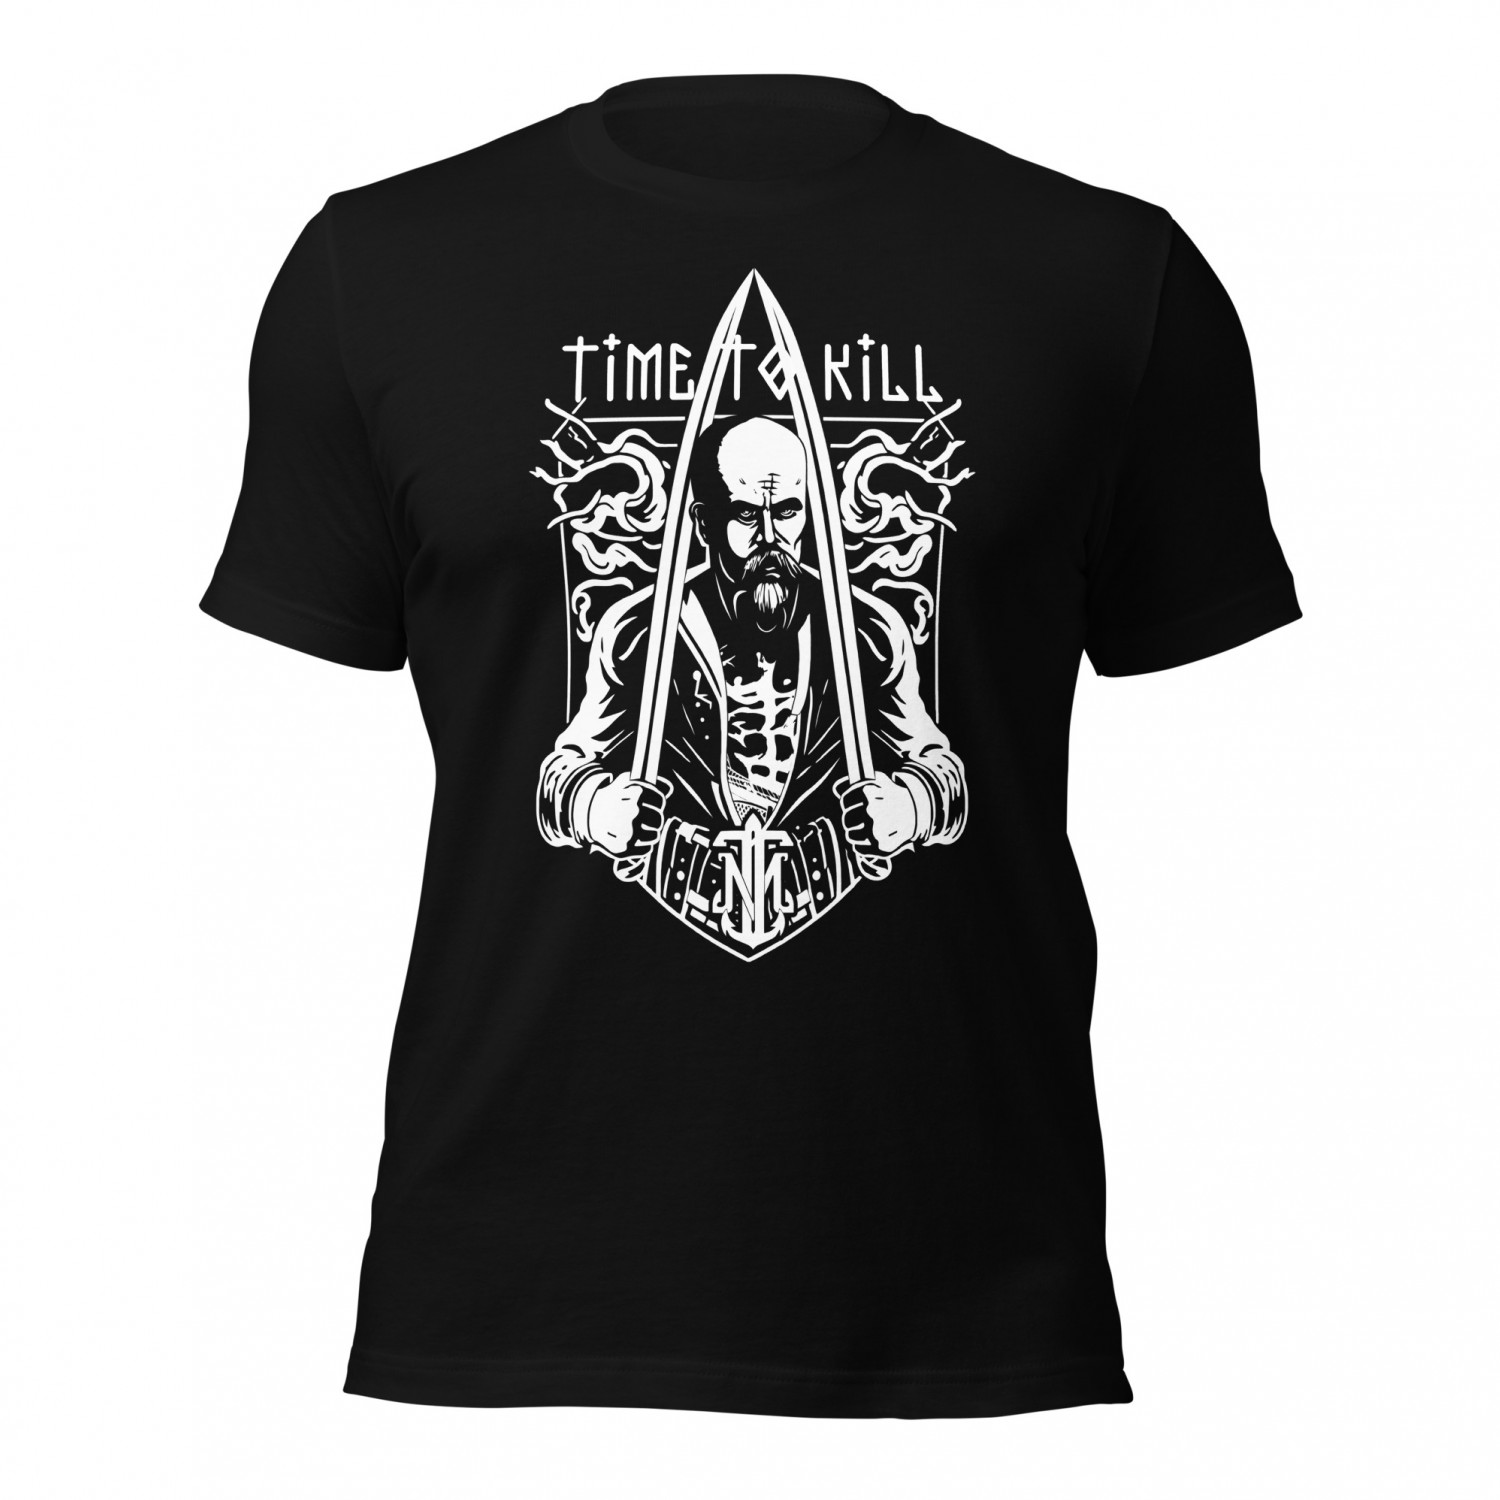 Buy a T-shirt - Time to kill